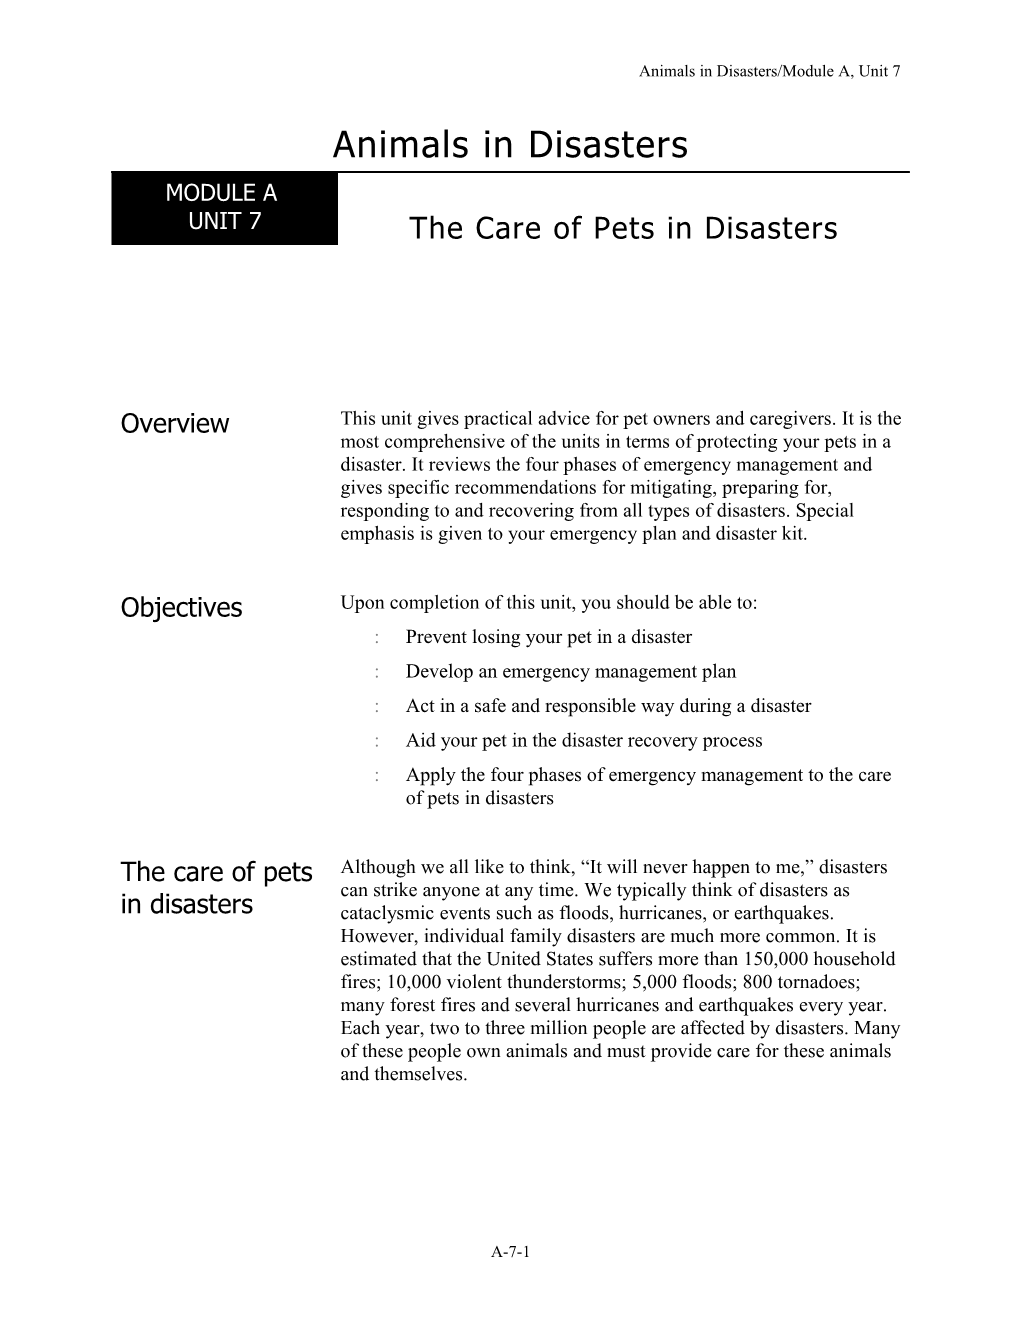 The Care of Pets in Disasters